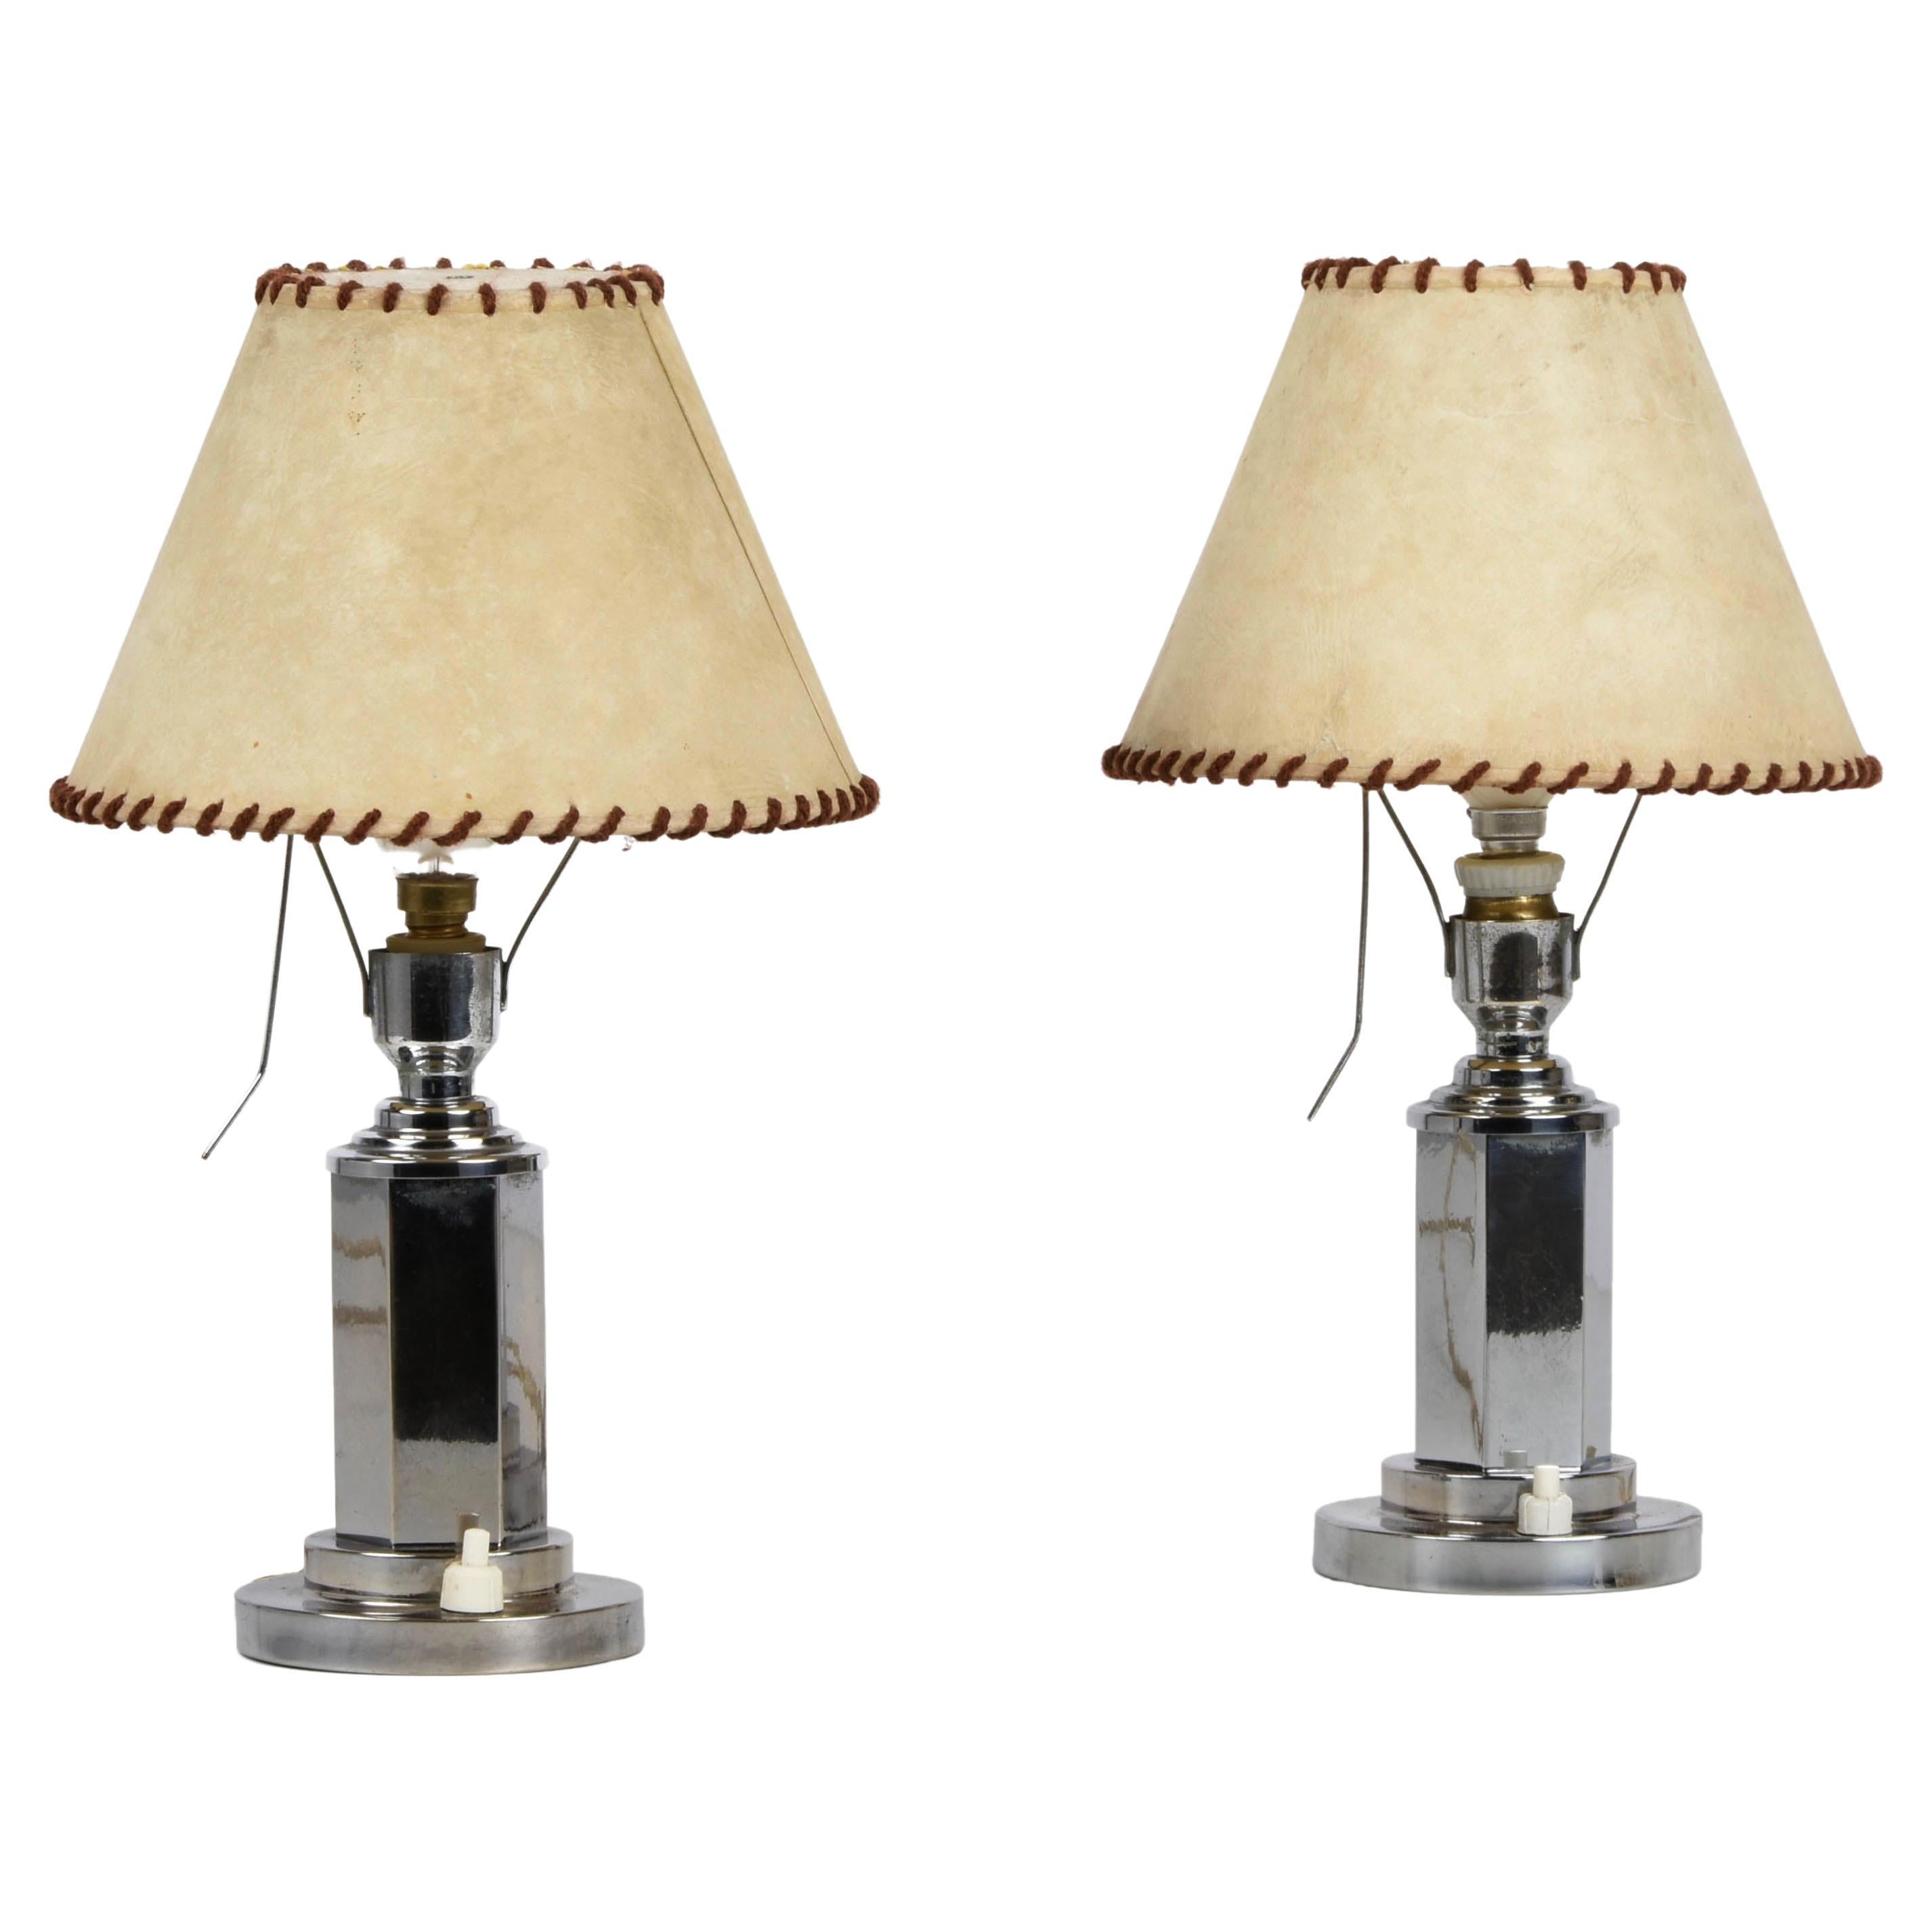 Pair of Italian Chrome Table Lamps with Adjustable Parchment Lampshade, 1940s